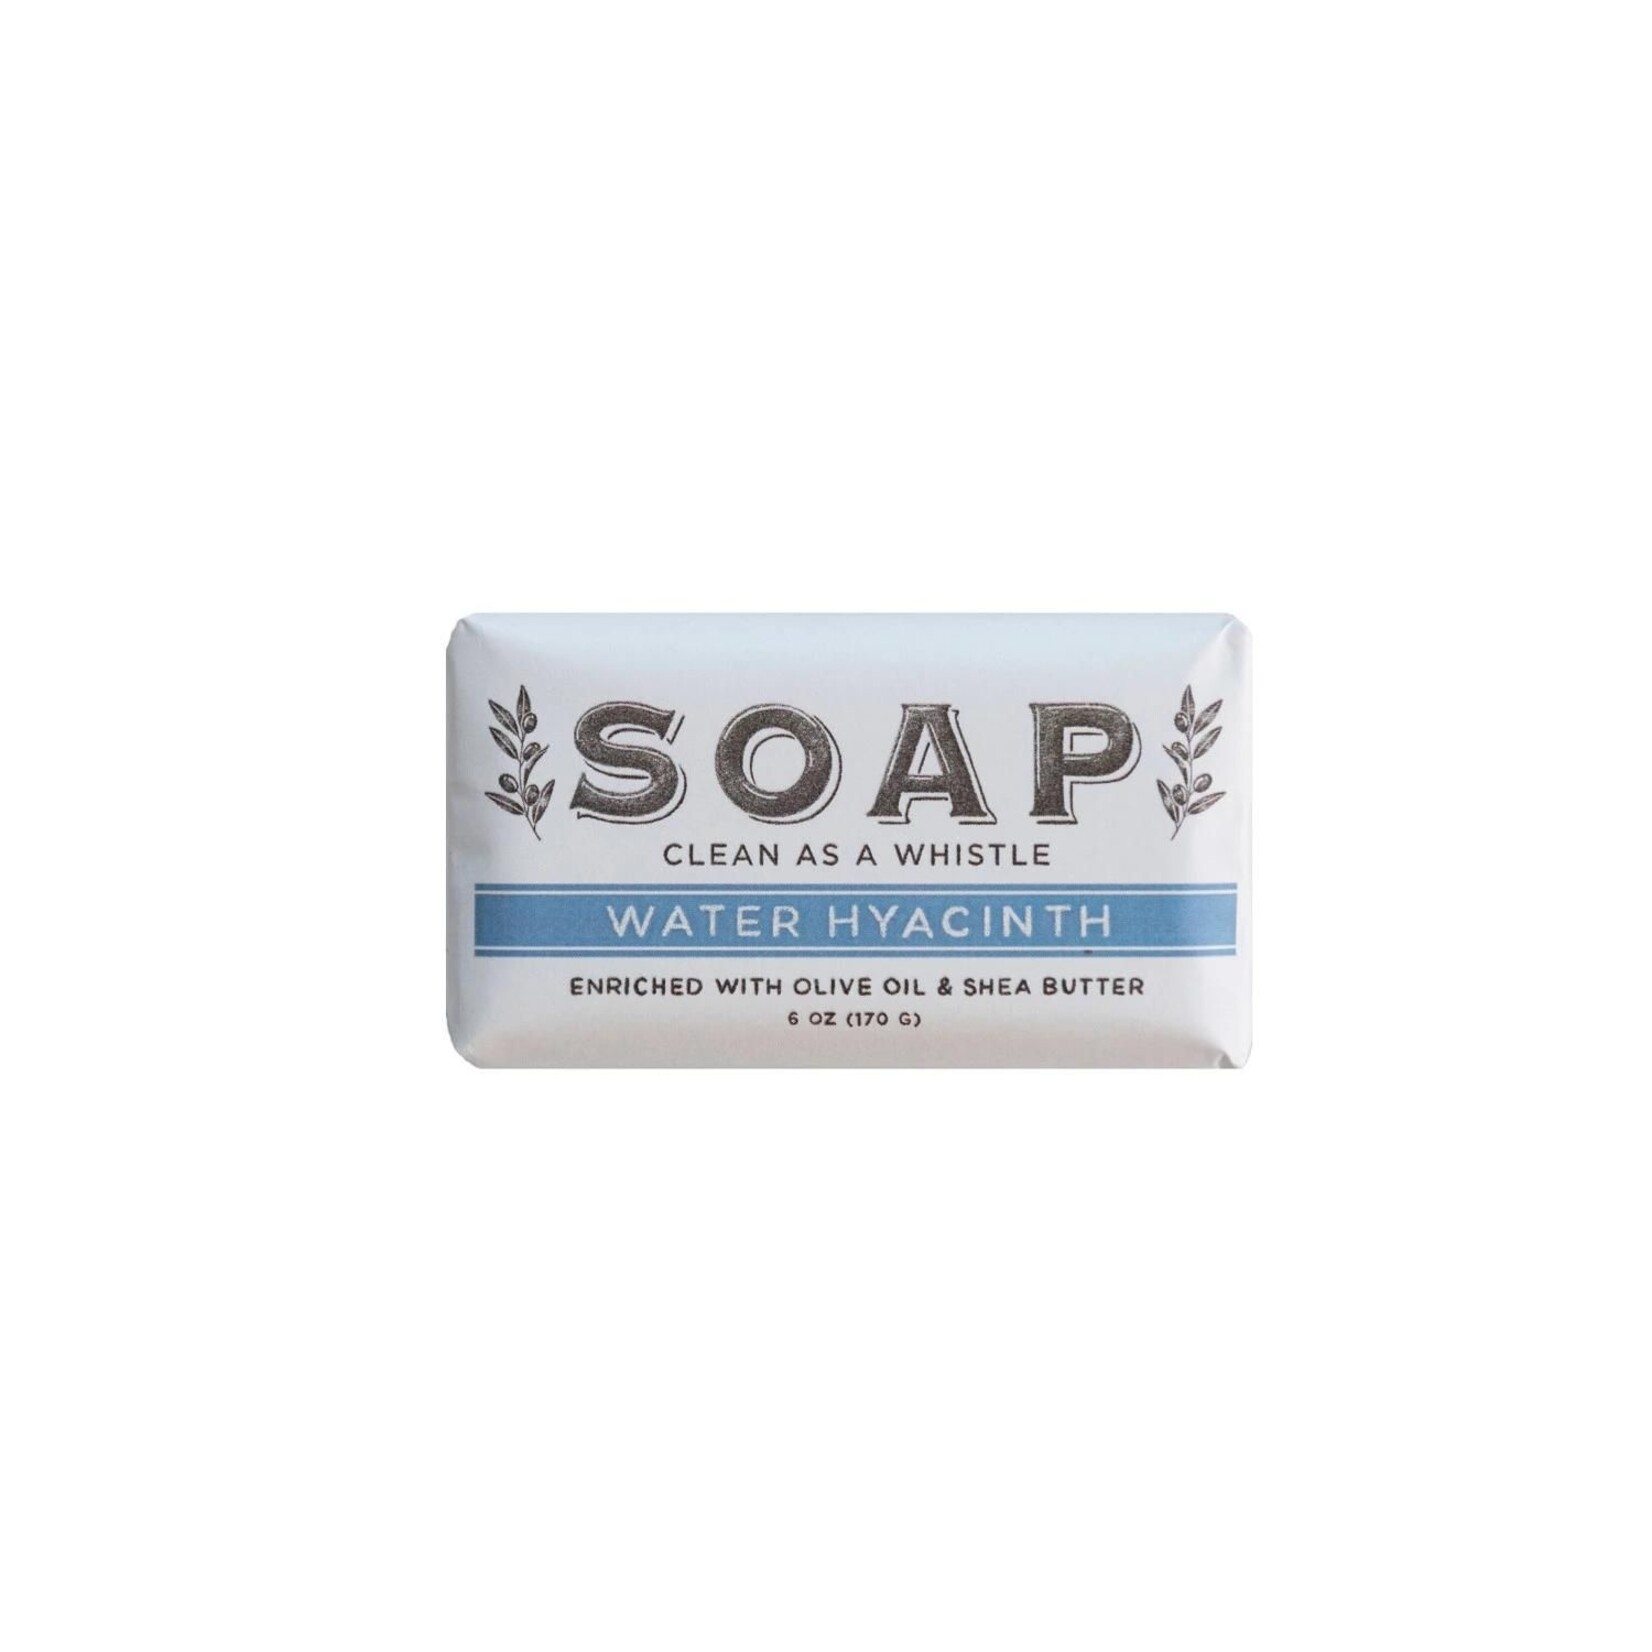 Water Hyacinth Scented Soap Bar